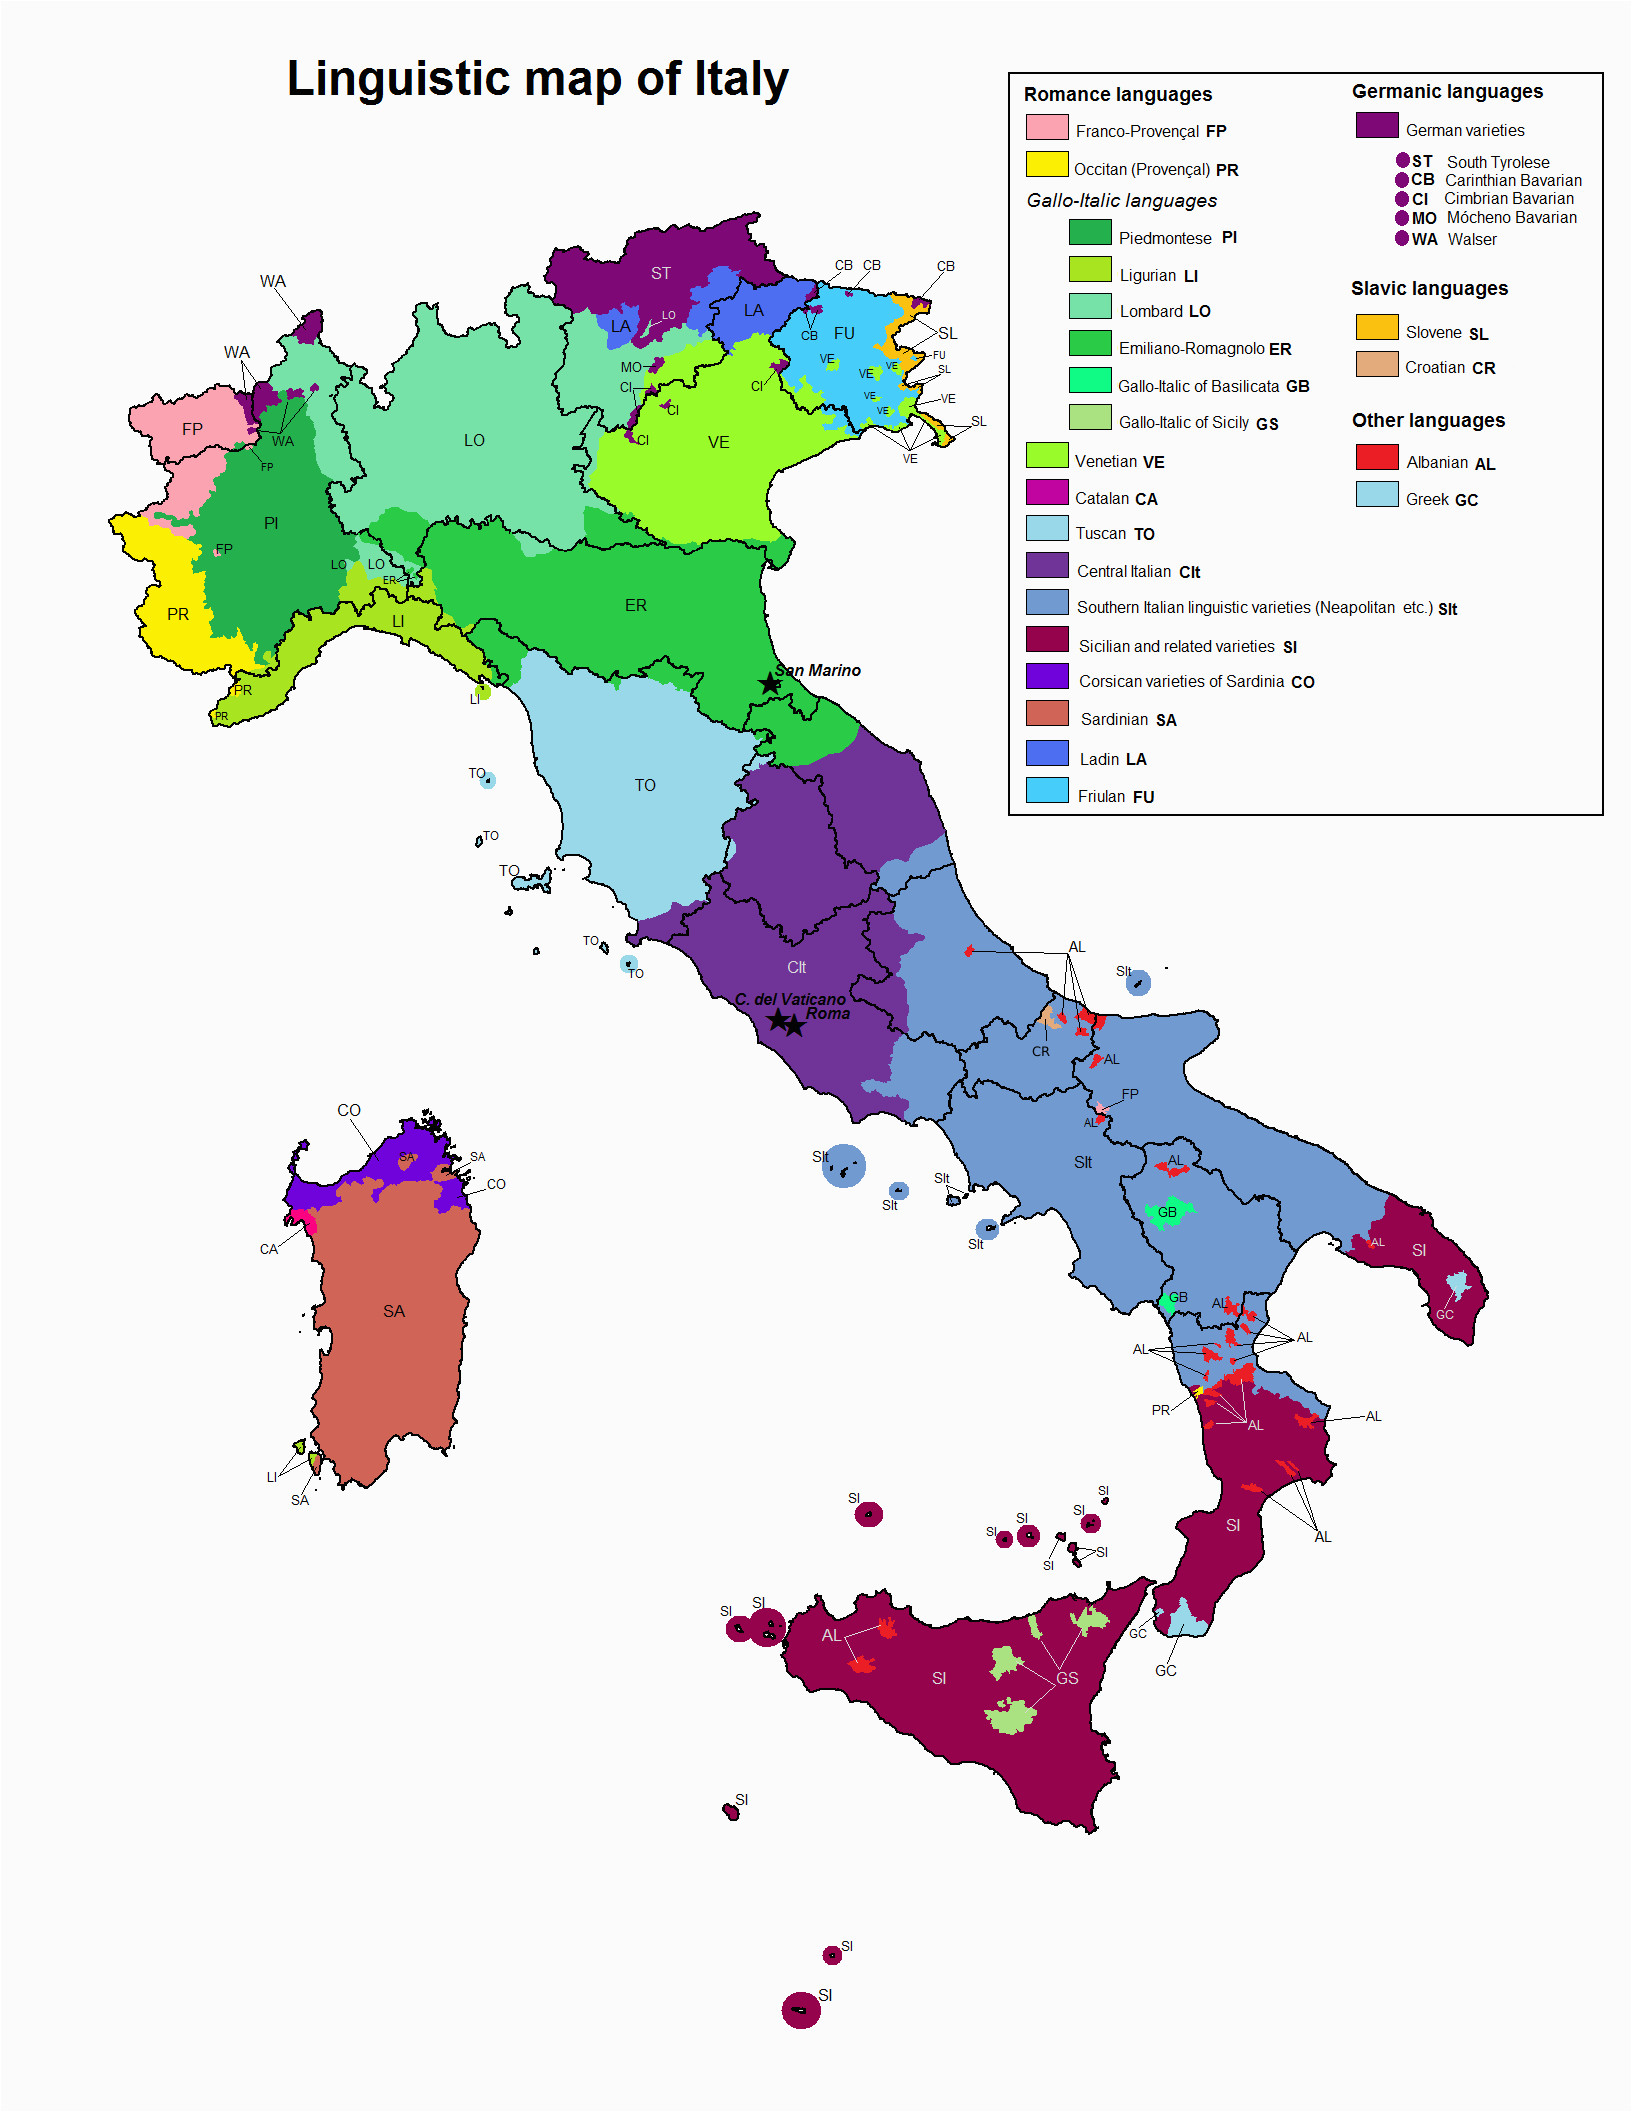 linguistics are so important this map show the linguistics of italy